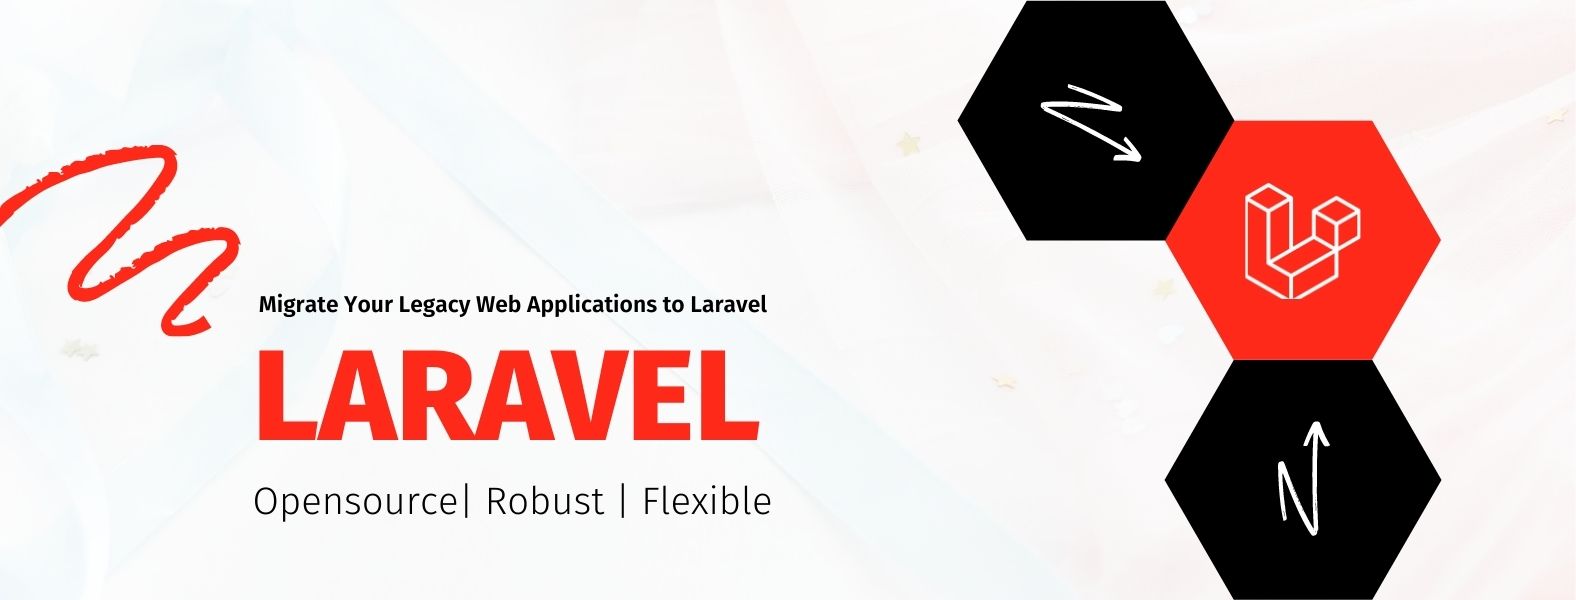 Migrating Your Legacy Web Applications to Laravel 